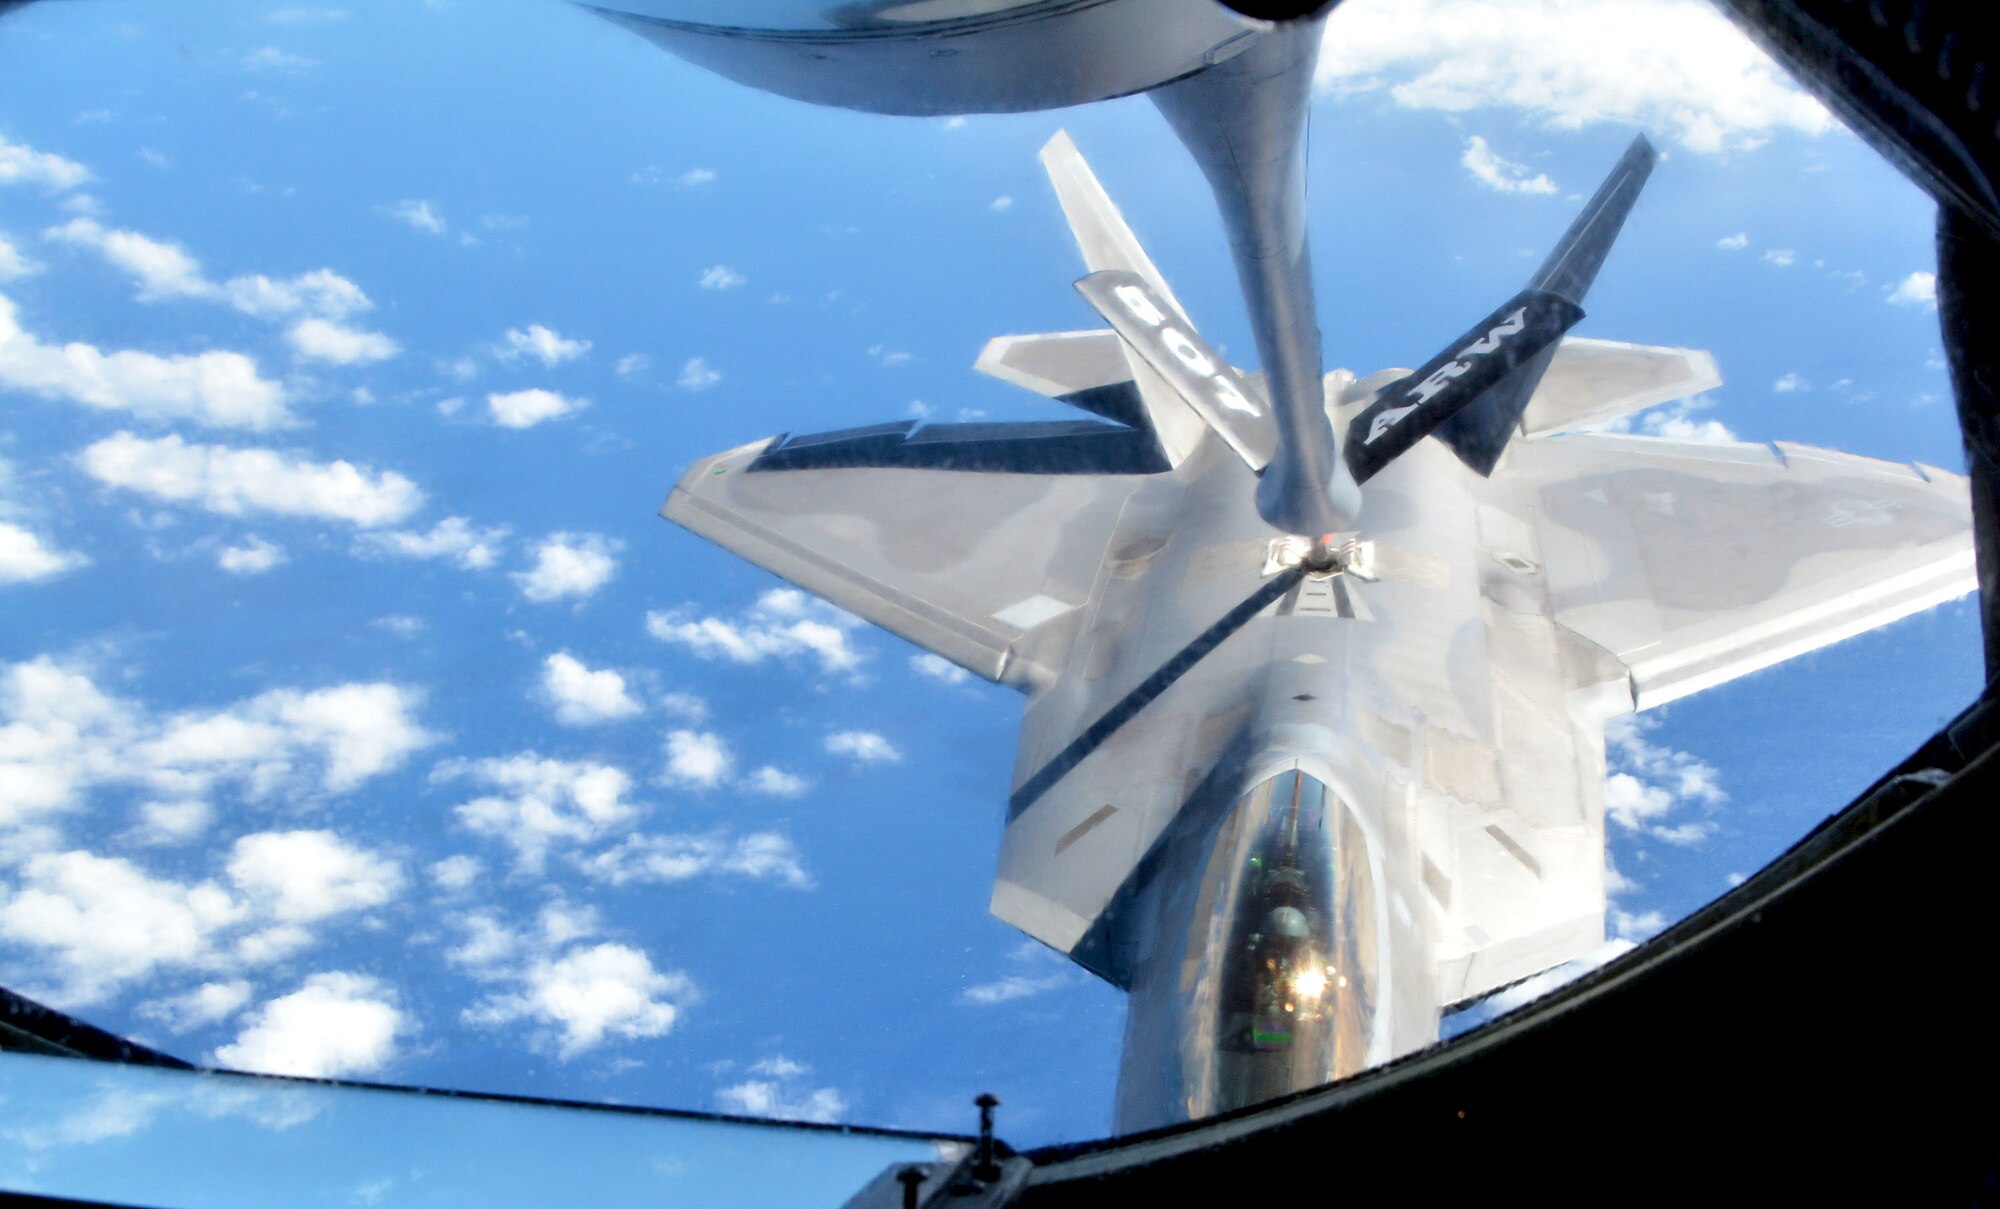 A 154th Wing Hawaii National Guard F-22 Raptor from Joint Base Pearl Harbor-Hickam, Hawaii, receives fuel from a 507th Air Refueling Wing KC-135R Stratotanker from Tinker Air Force Base, Okla., Jan. 22, 2018, in support of Exercise Sentry Aloha in Hawaii. (U.S. Air Force photo/Tech. Sgt. Samantha Mathison)